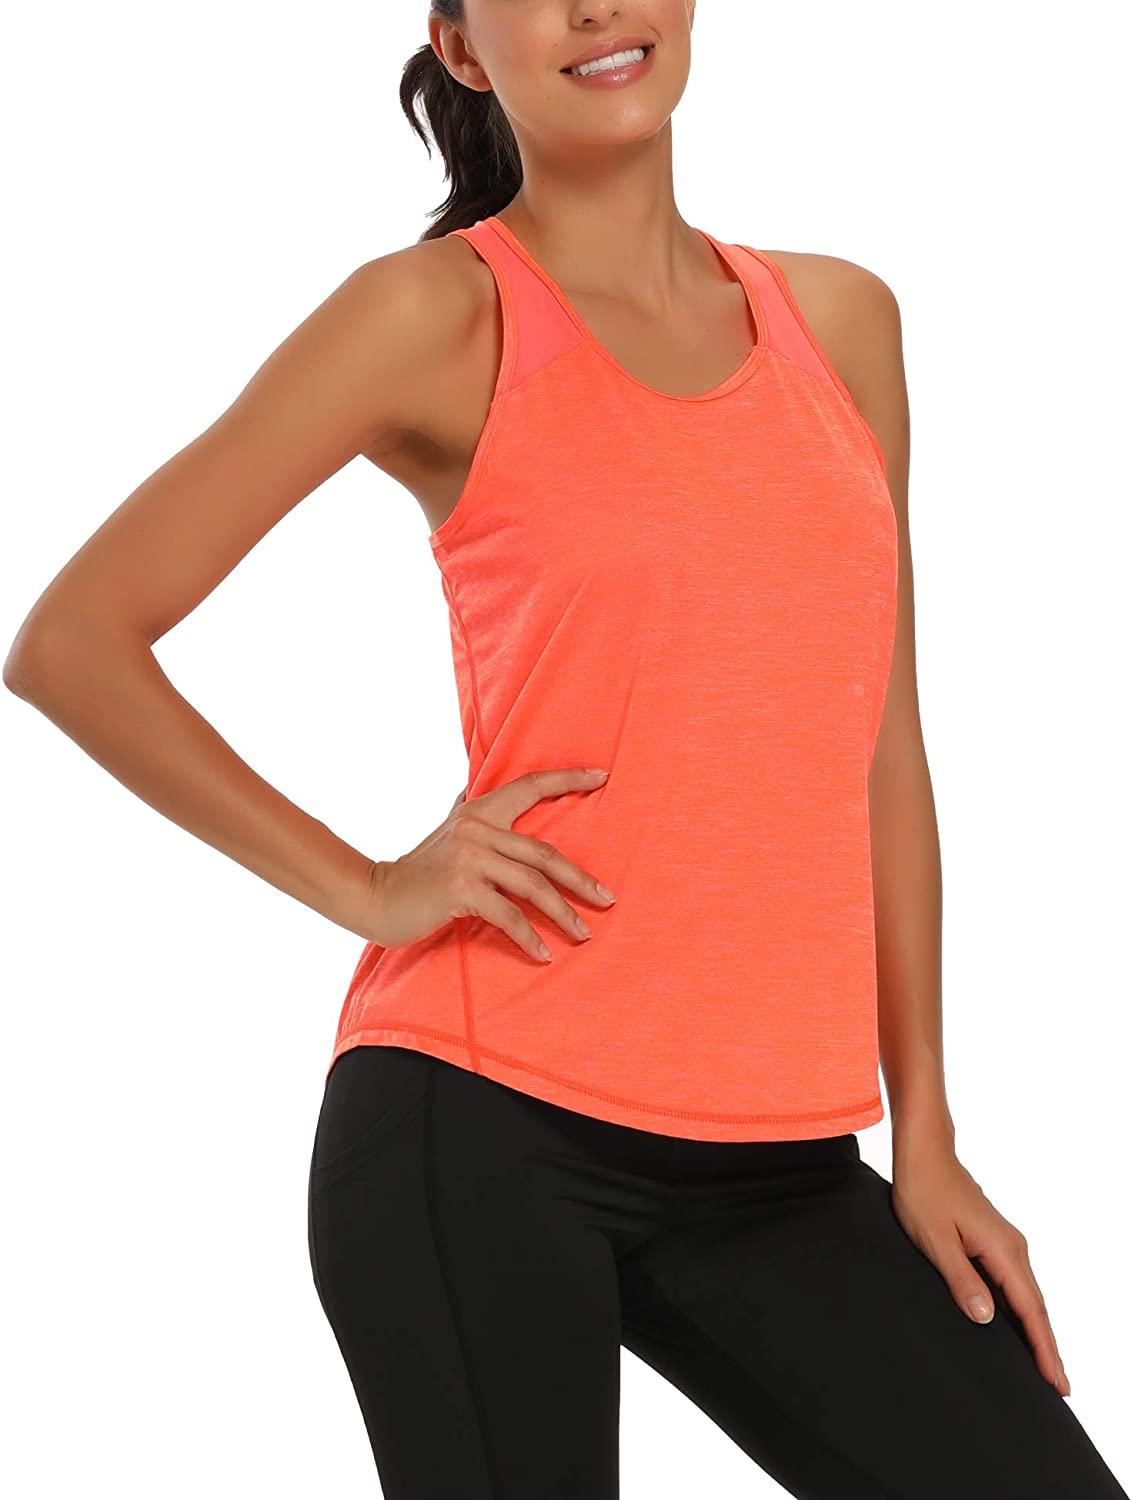  Burnt Orange Womens Athletic Tank Top Gym Shirts for